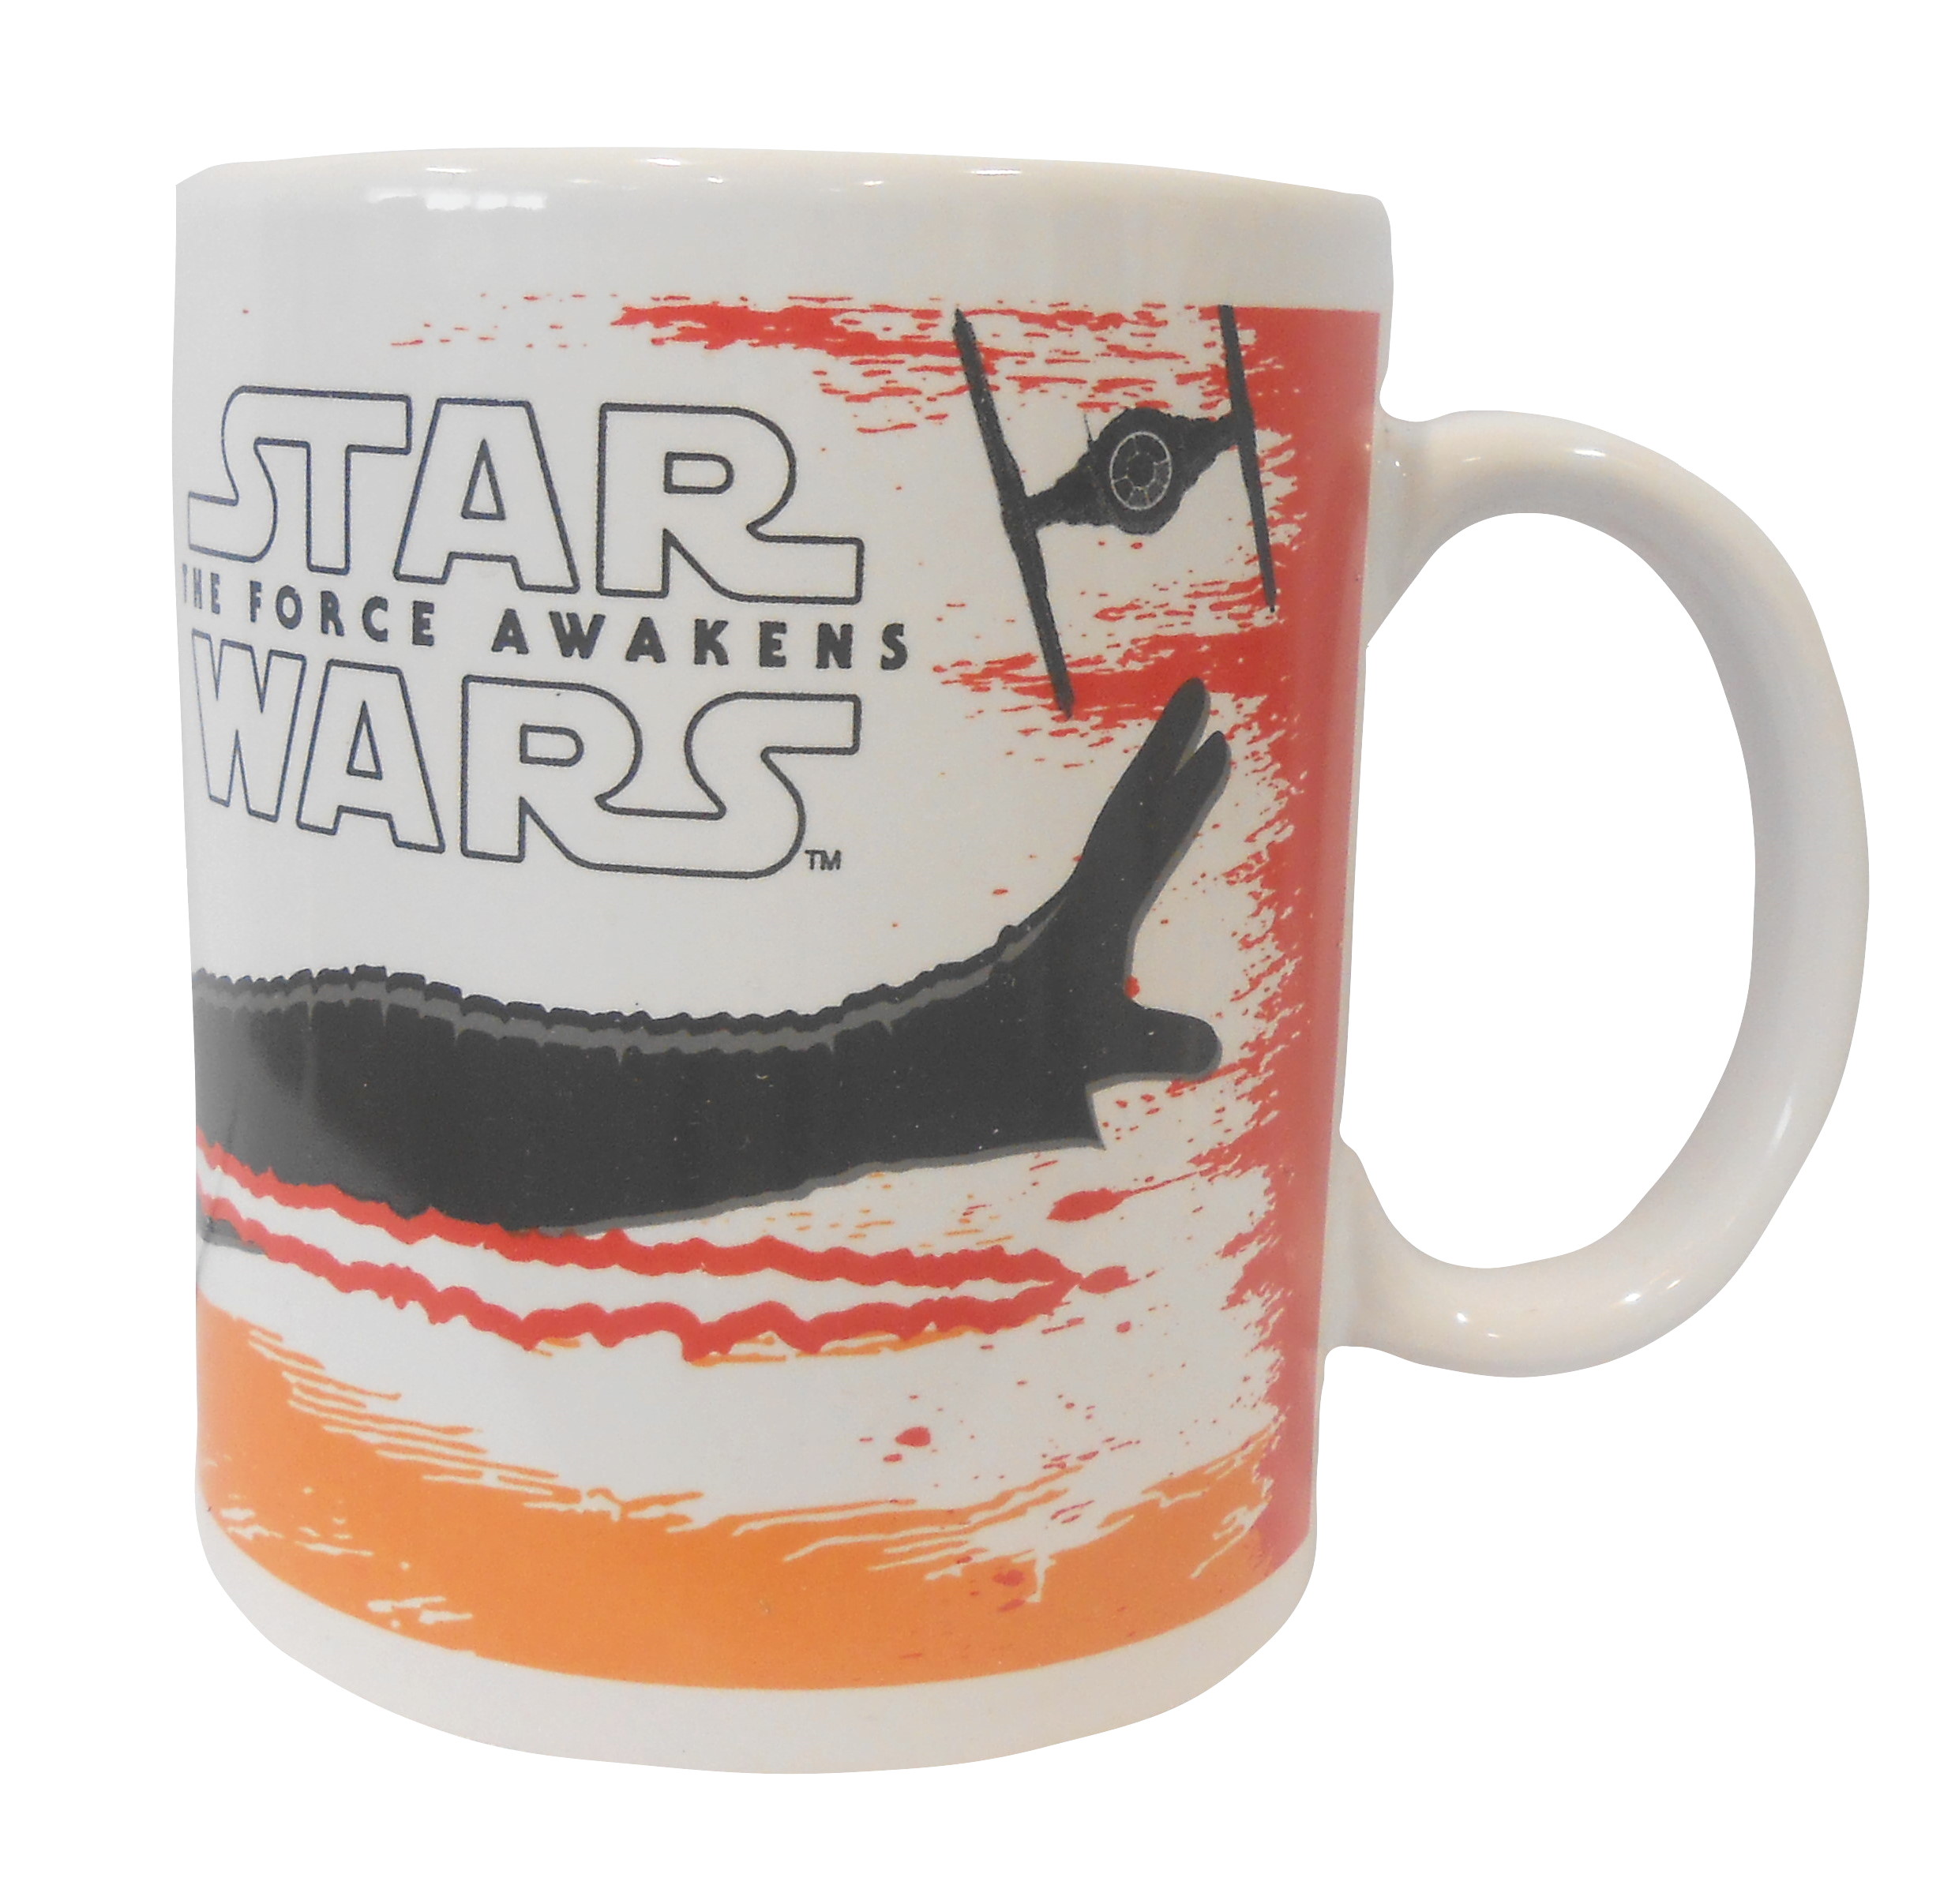 star wars cup1a.jpg  by Thingimijigs